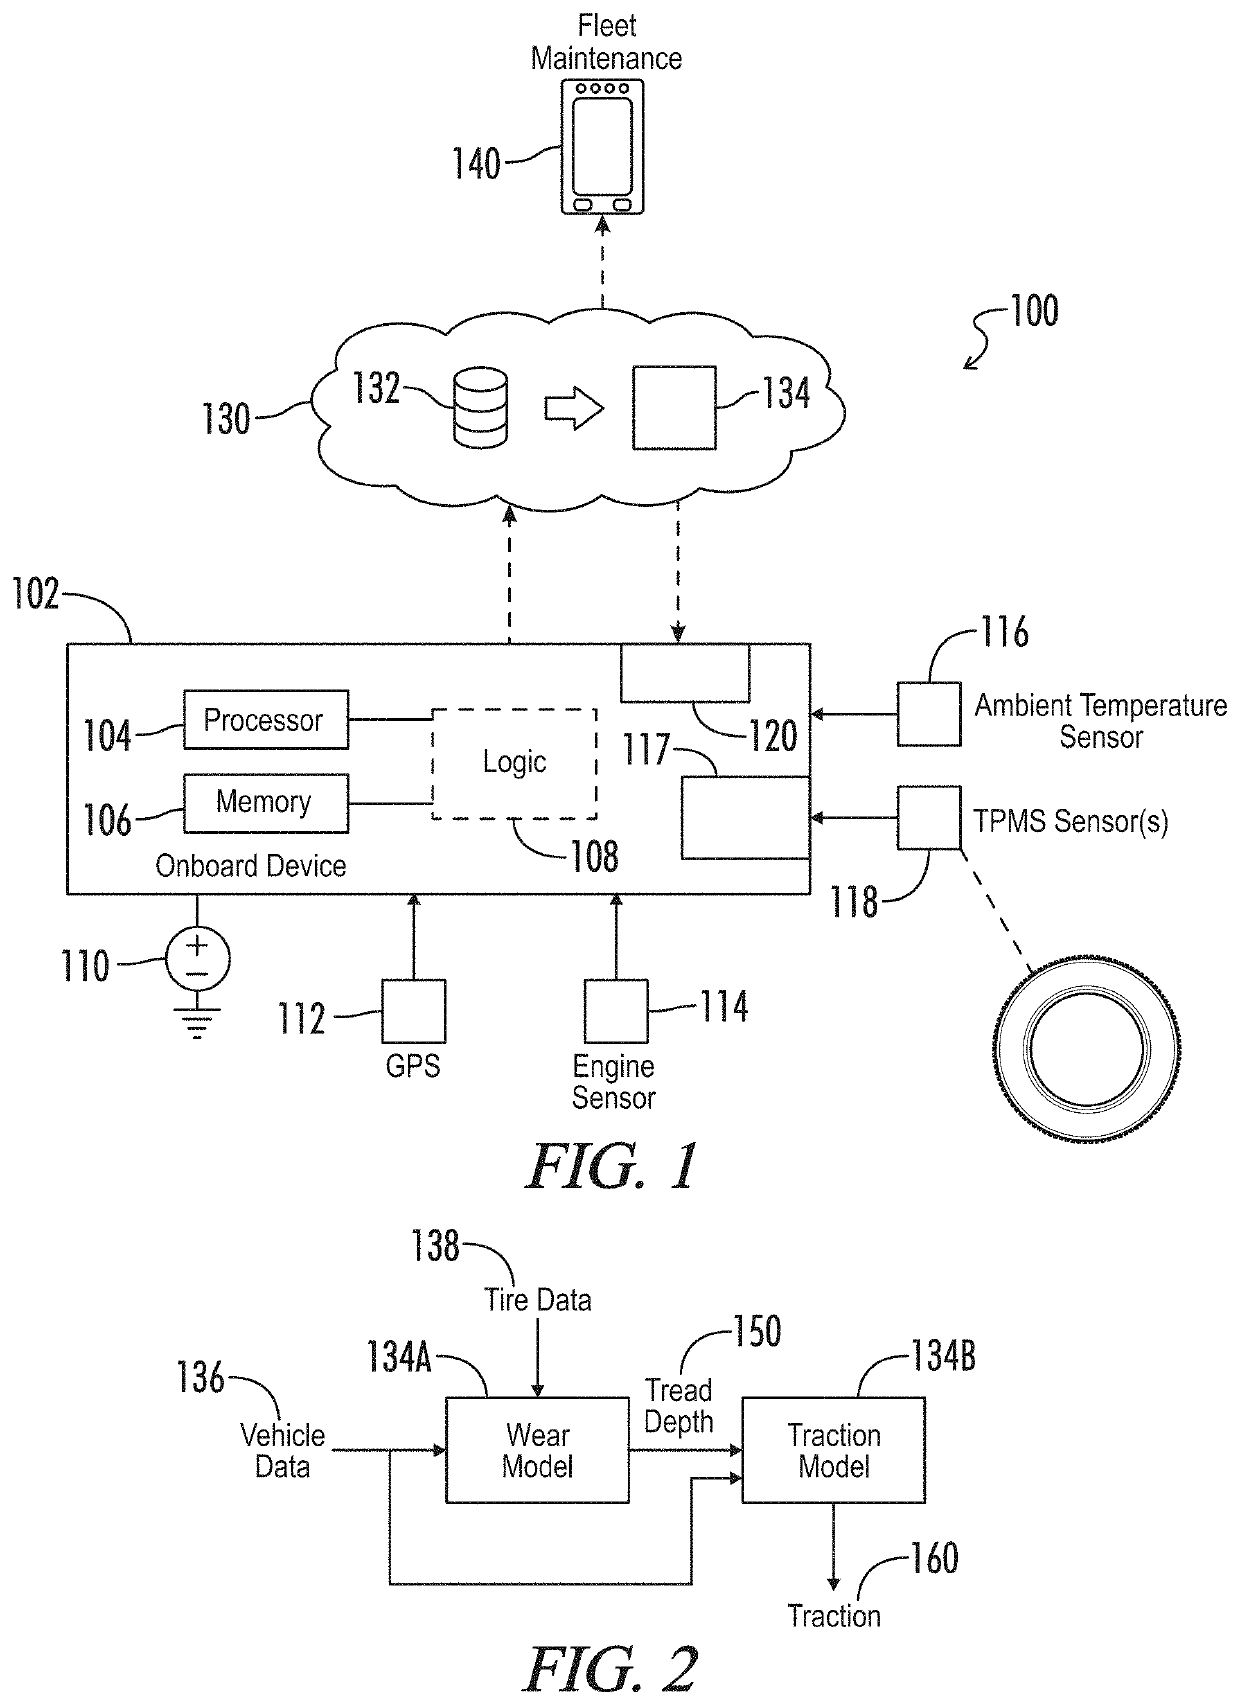 System and method for predicting tire traction capabilities and active safety applications